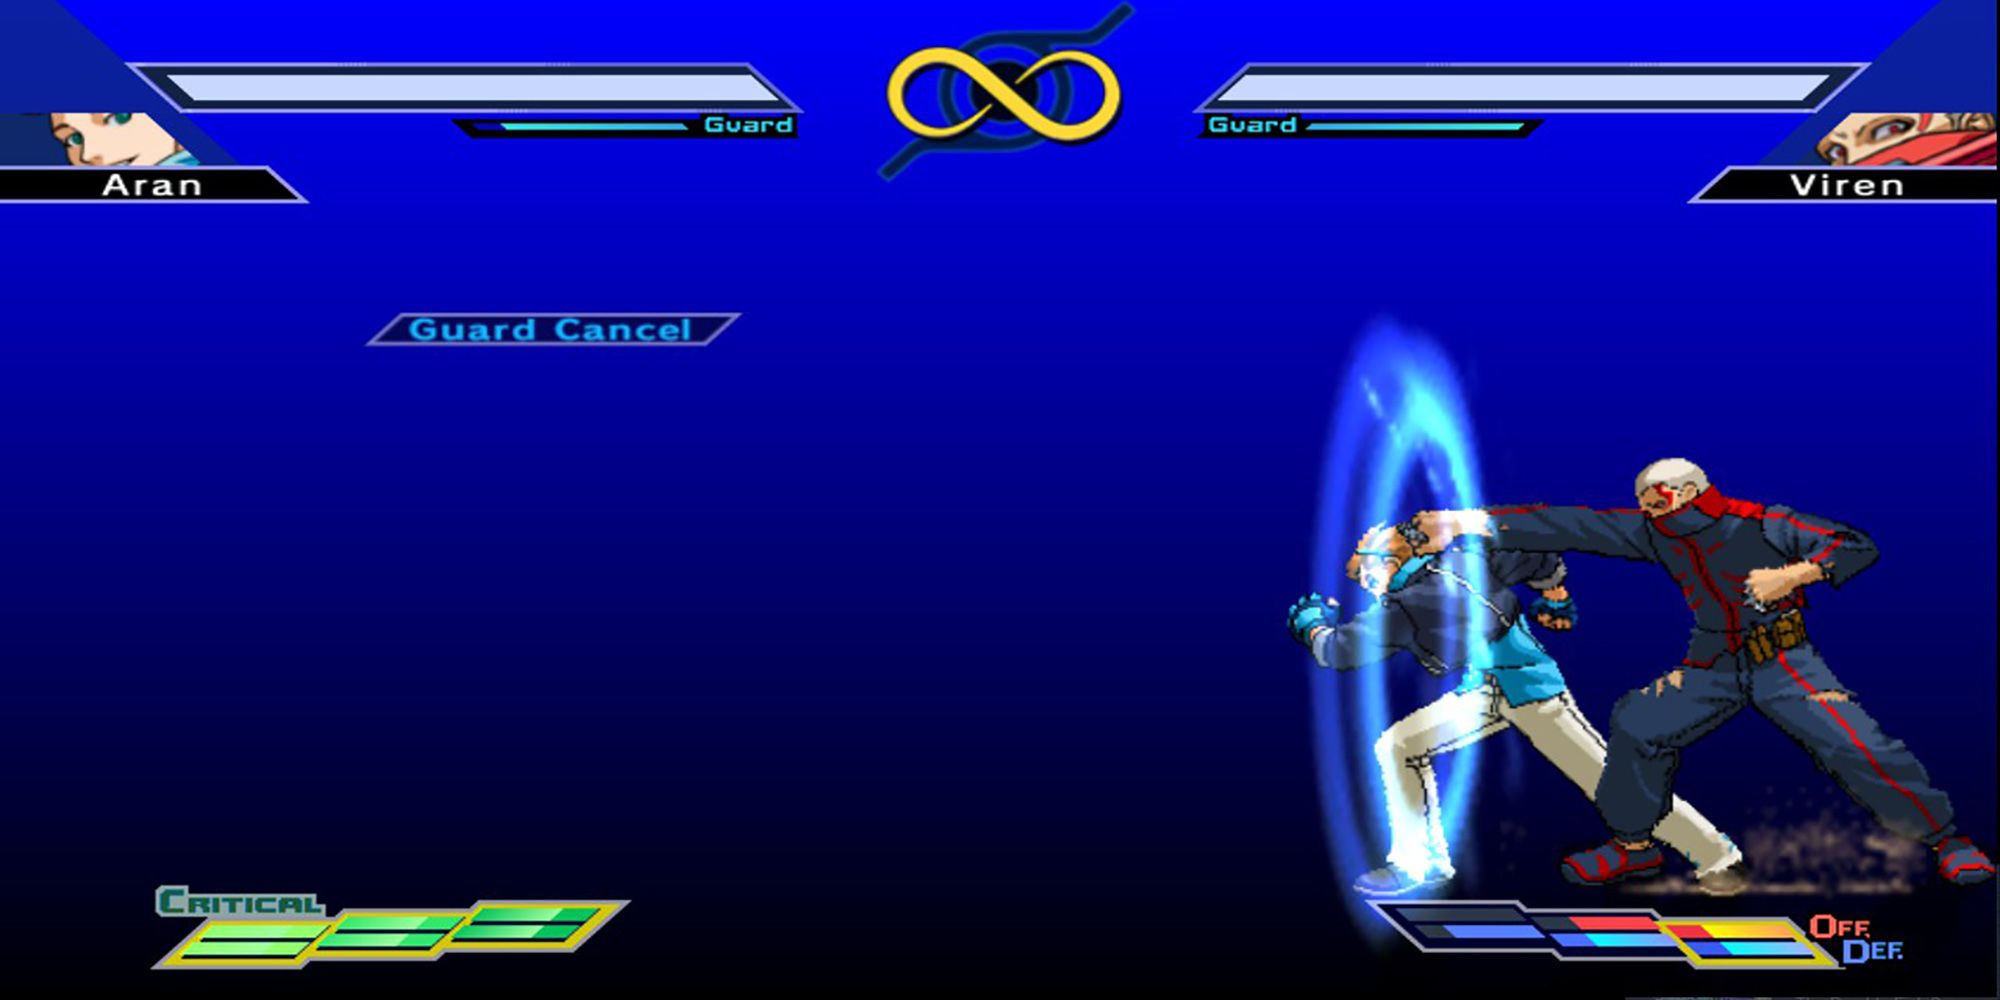 Aran deflects an attack from Viren with his Defensive Art in The Rumble Fish 2.